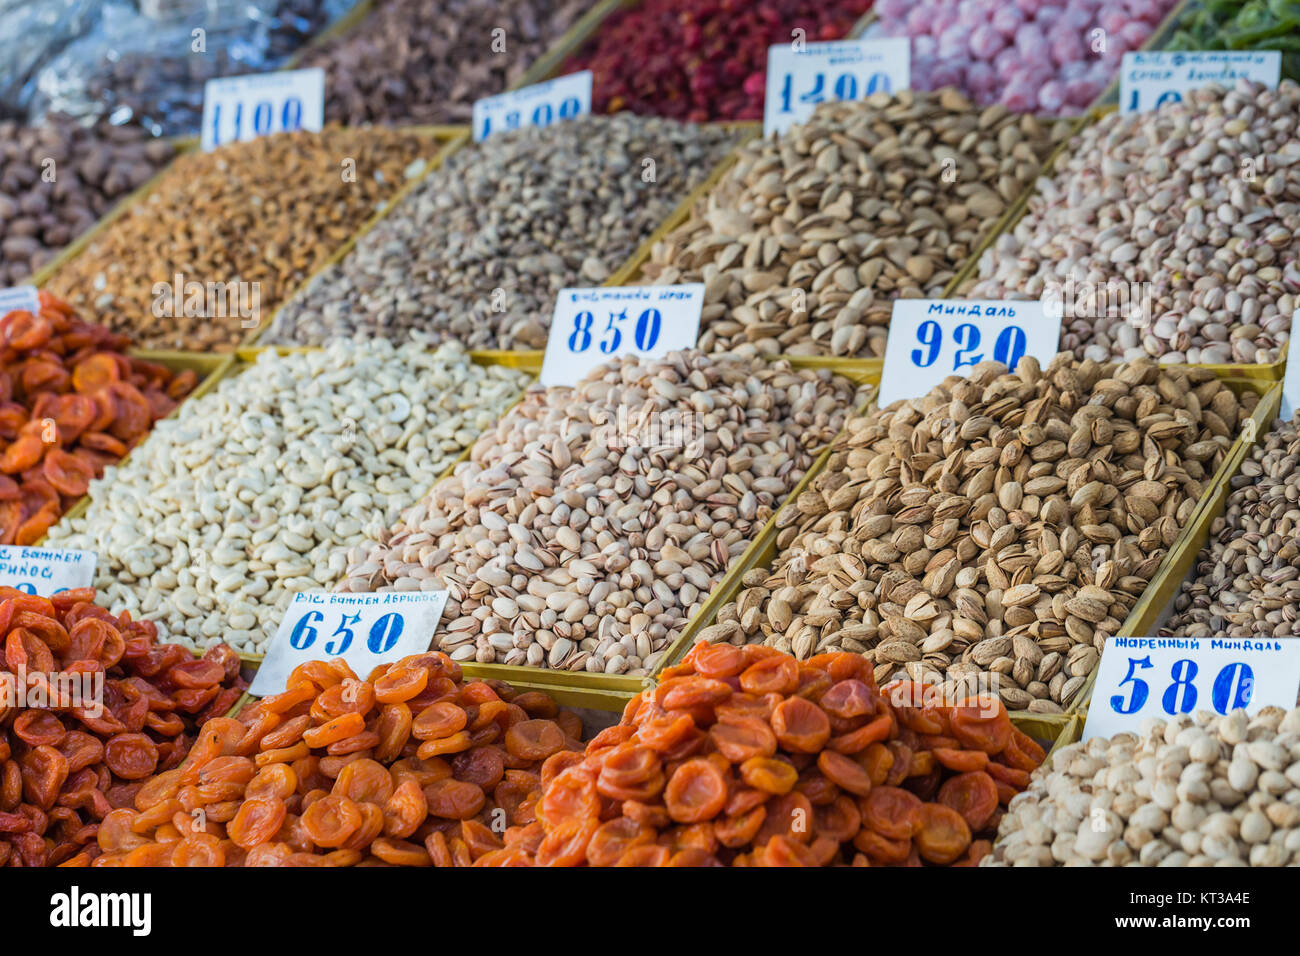 Dry fruits and spices like cashews, raisins, cloves, anise, etc. on display for sale in a Osh bazaar in Bishkek Kyrgyzstan. Stock Photo